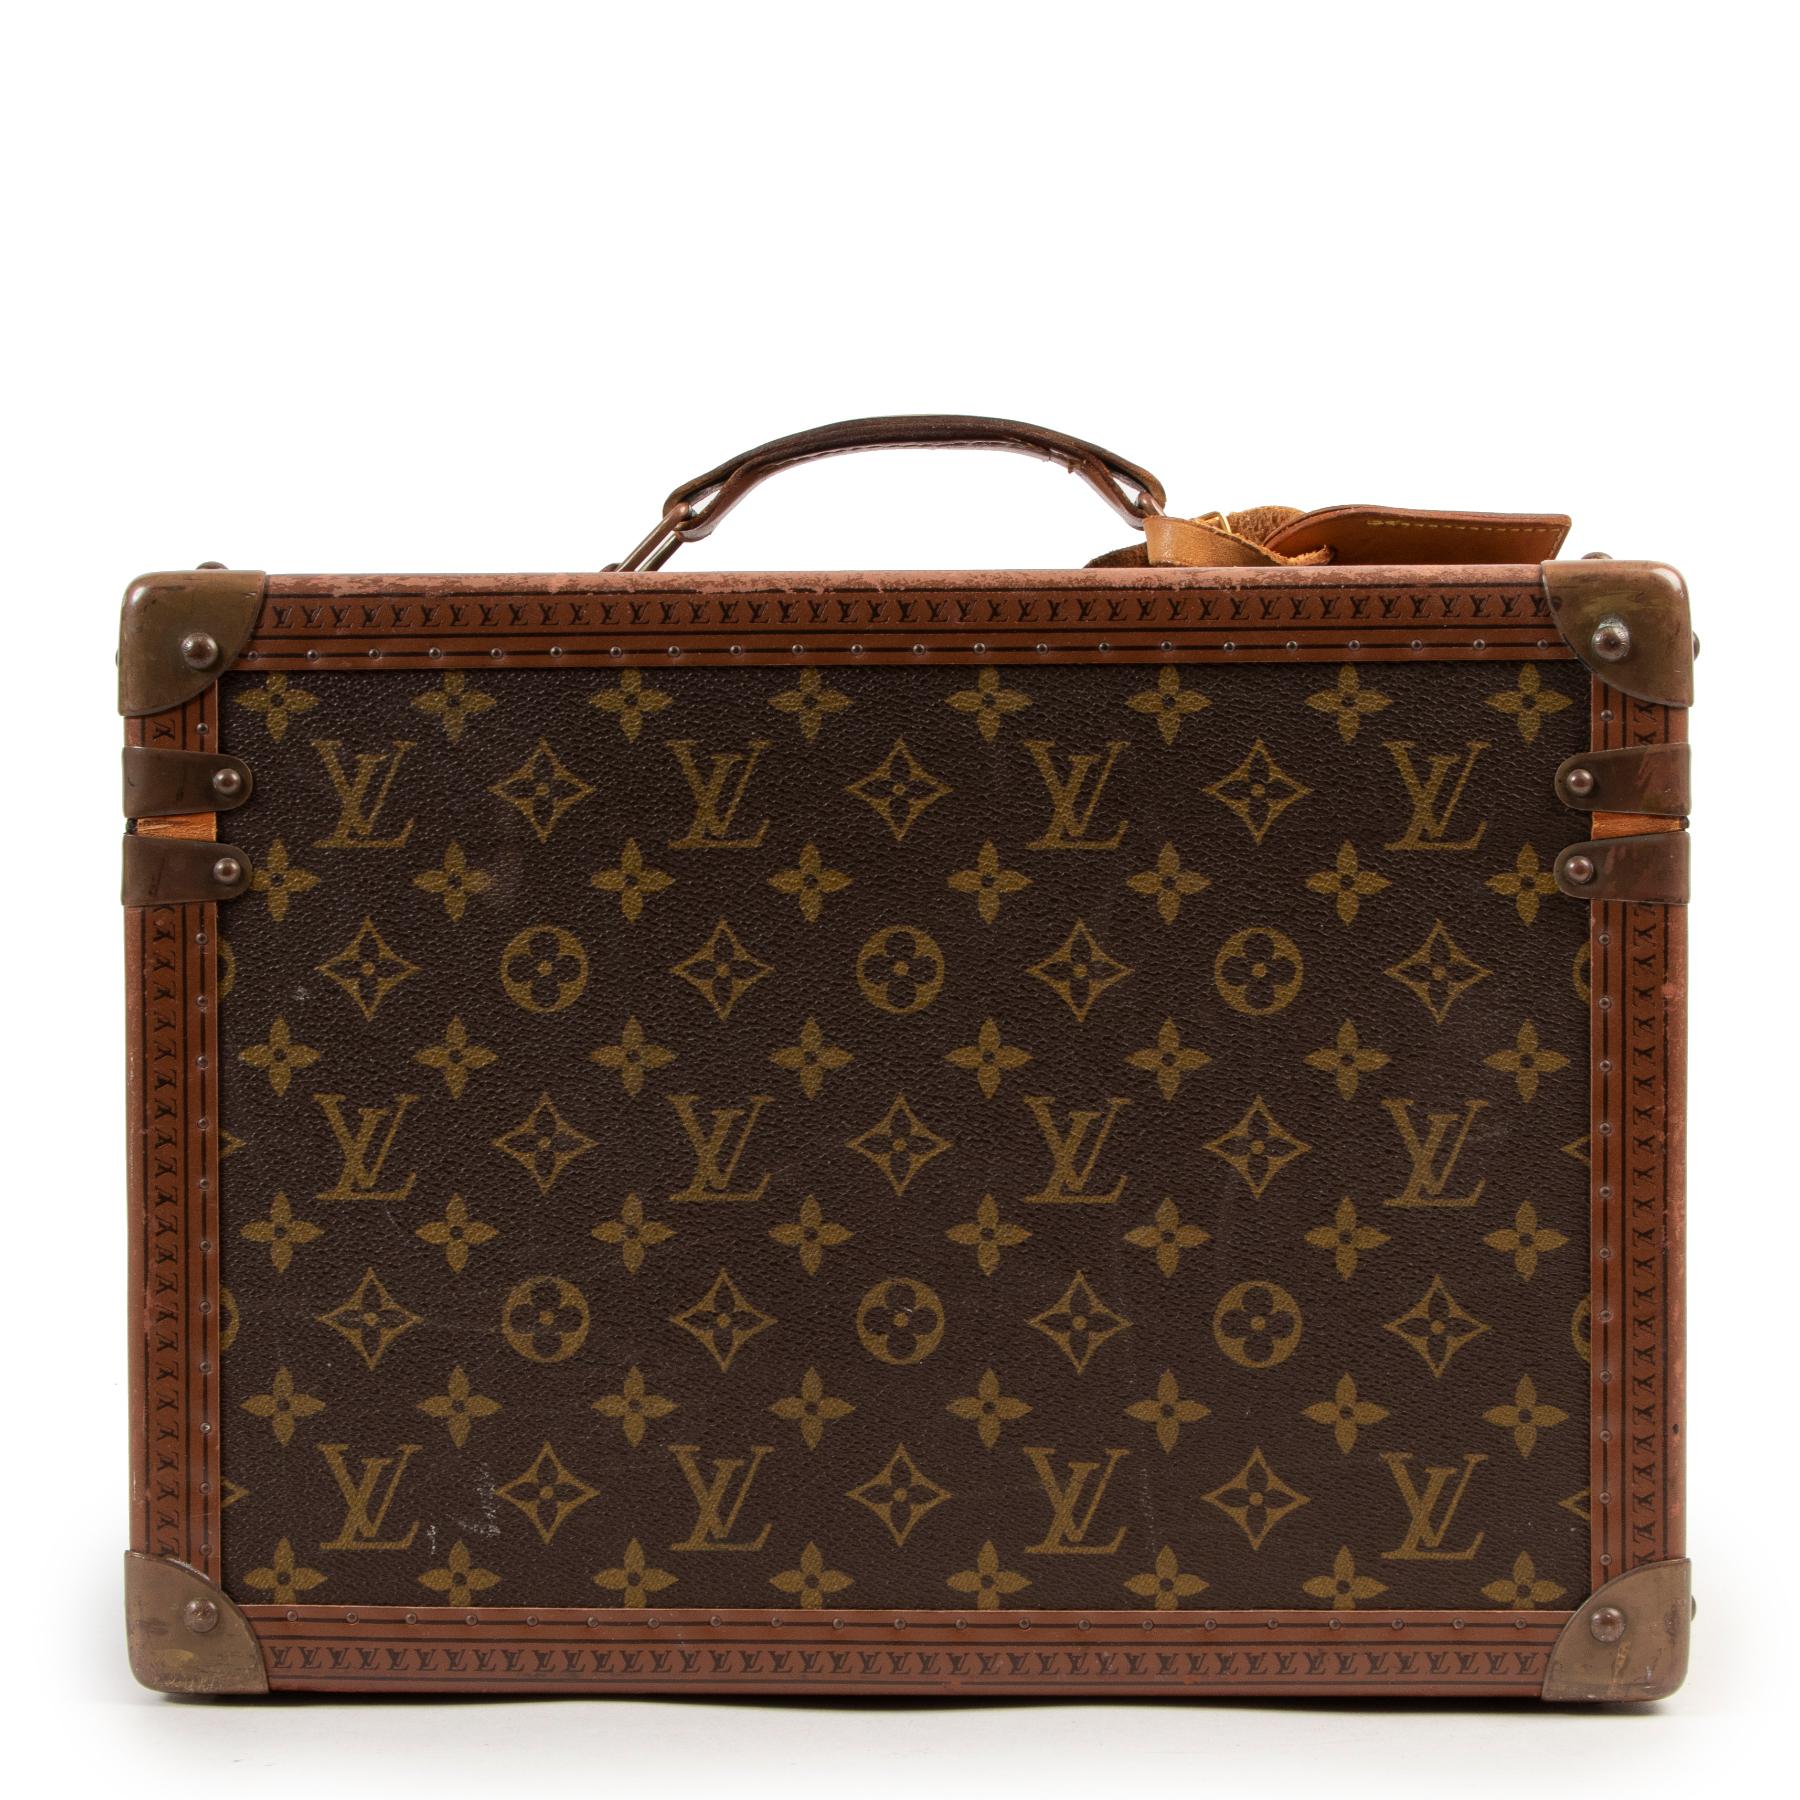 Preloved condition

Louis Vuitton Monogram Vintage Trunk Vanity Case Pharmacy Box

This gorgeous trunk case by Louis Vuitton comes in the iconic LV monogram canvas. The borders are featuring brown leather with the Louis Vuitton logo on. The front